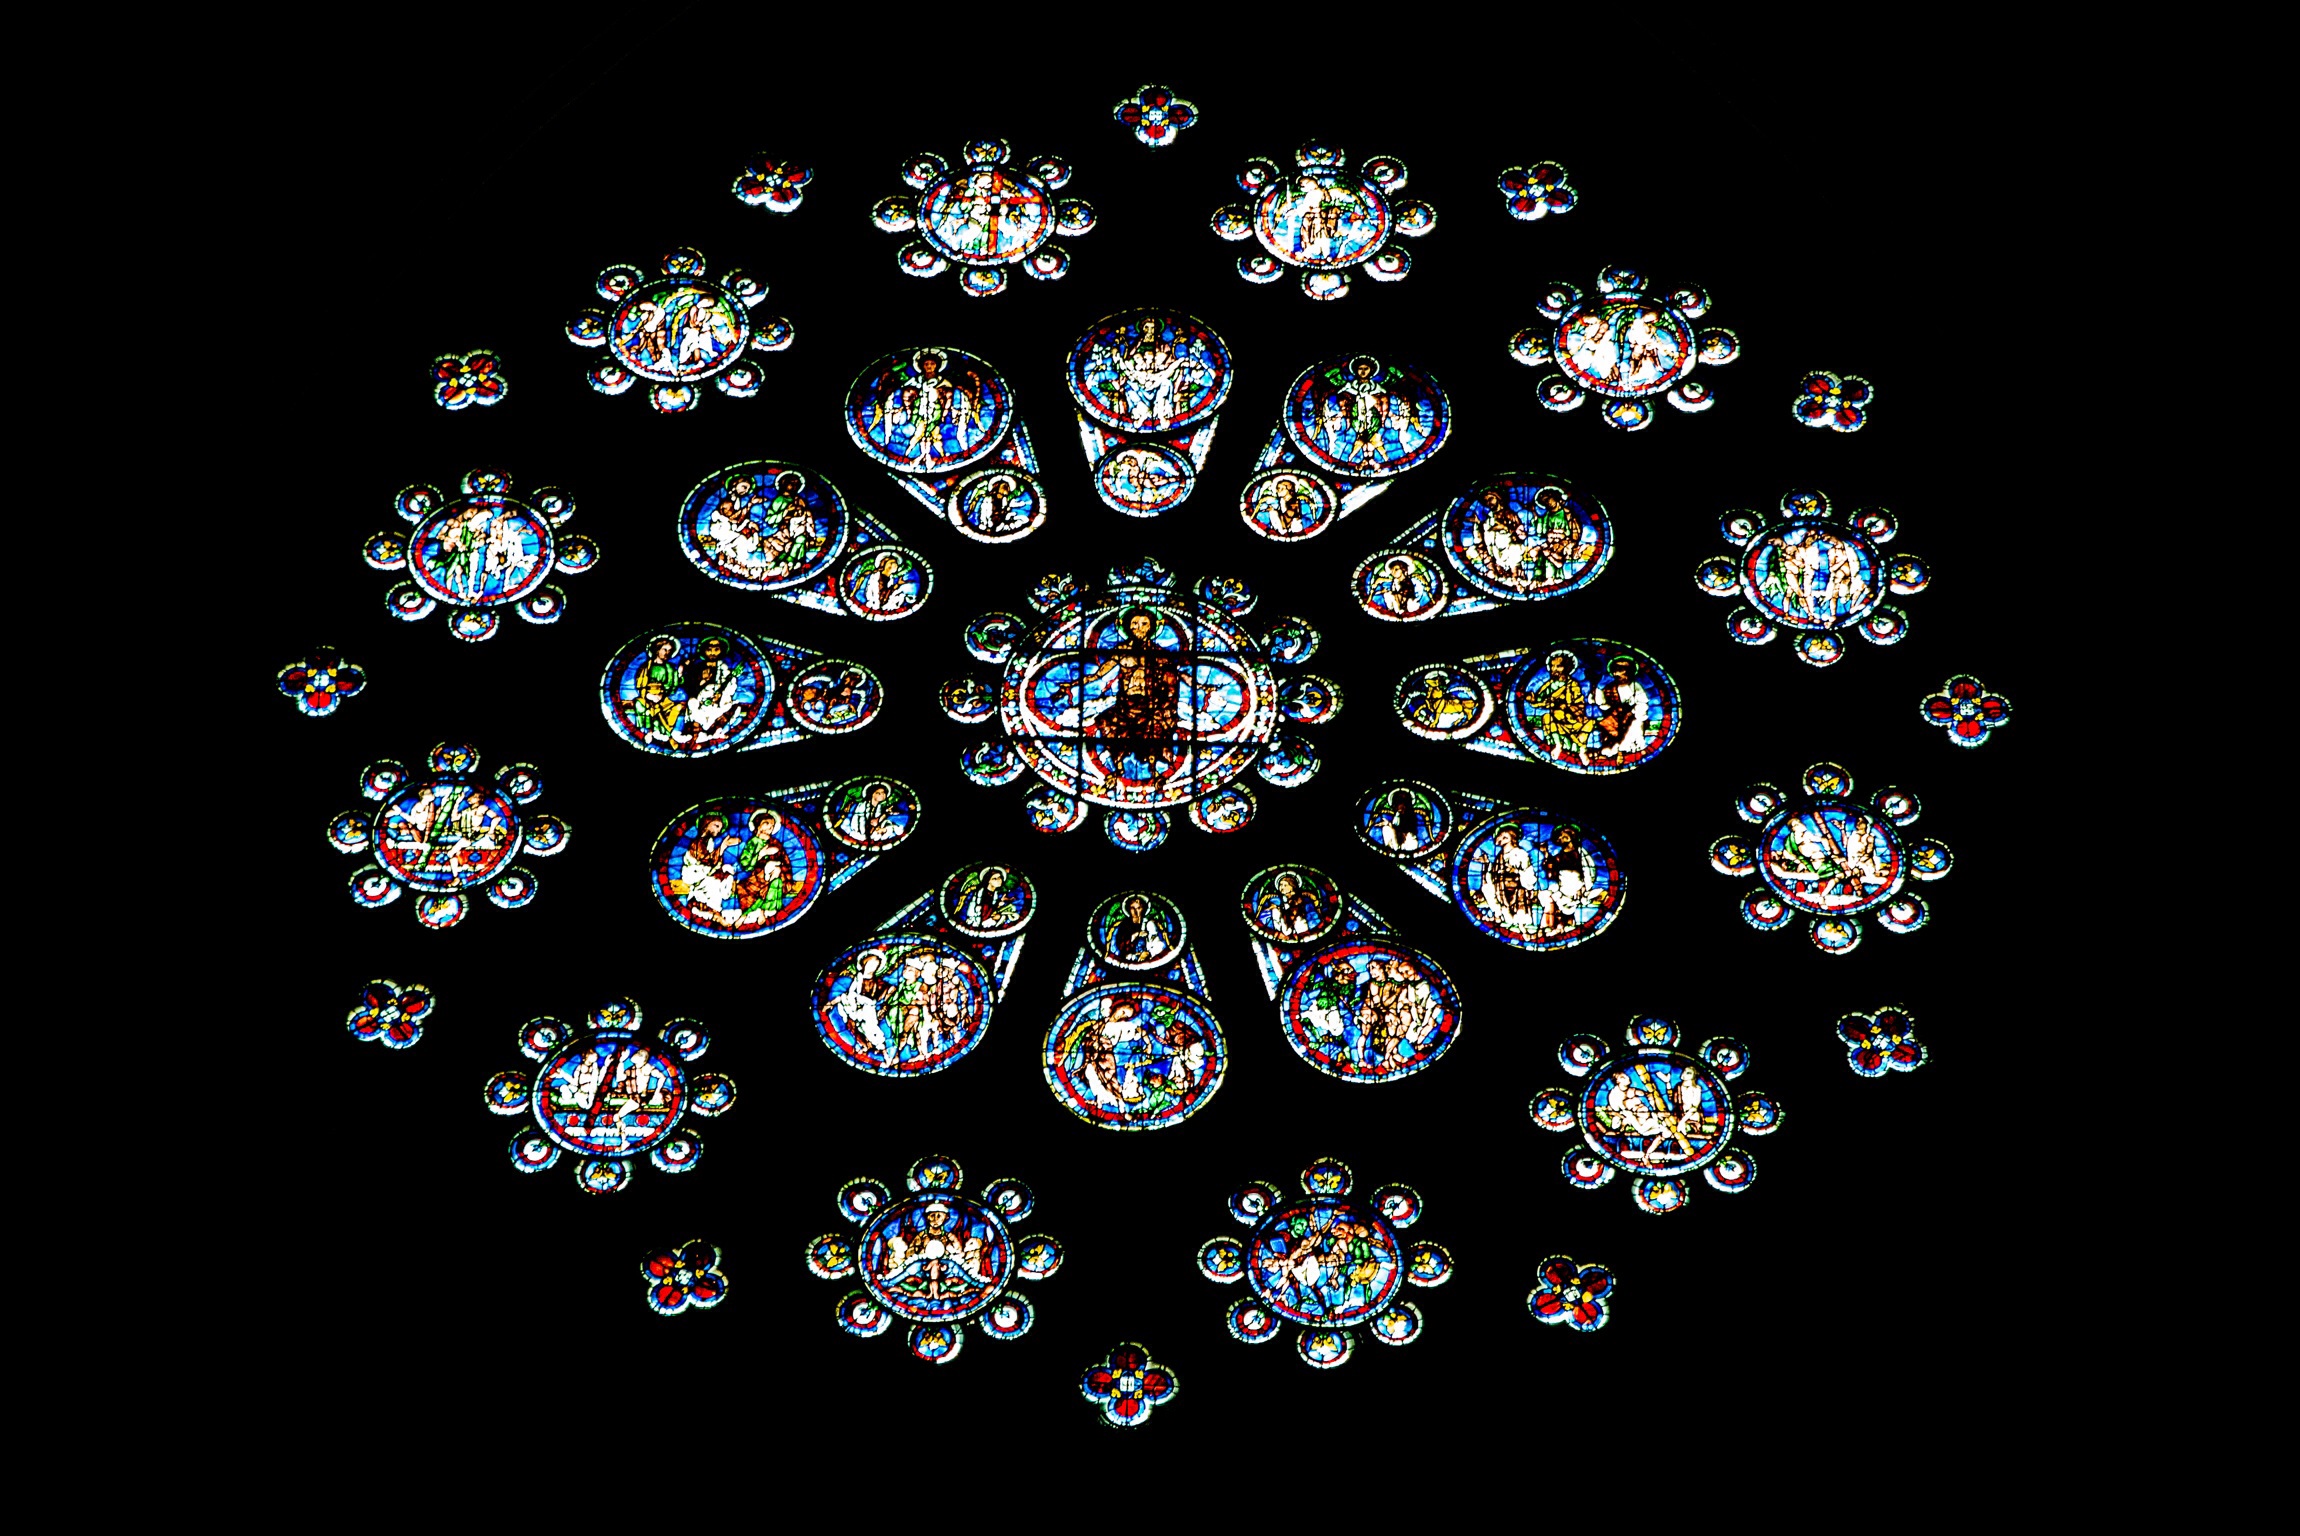 Rose Window of Chartres...